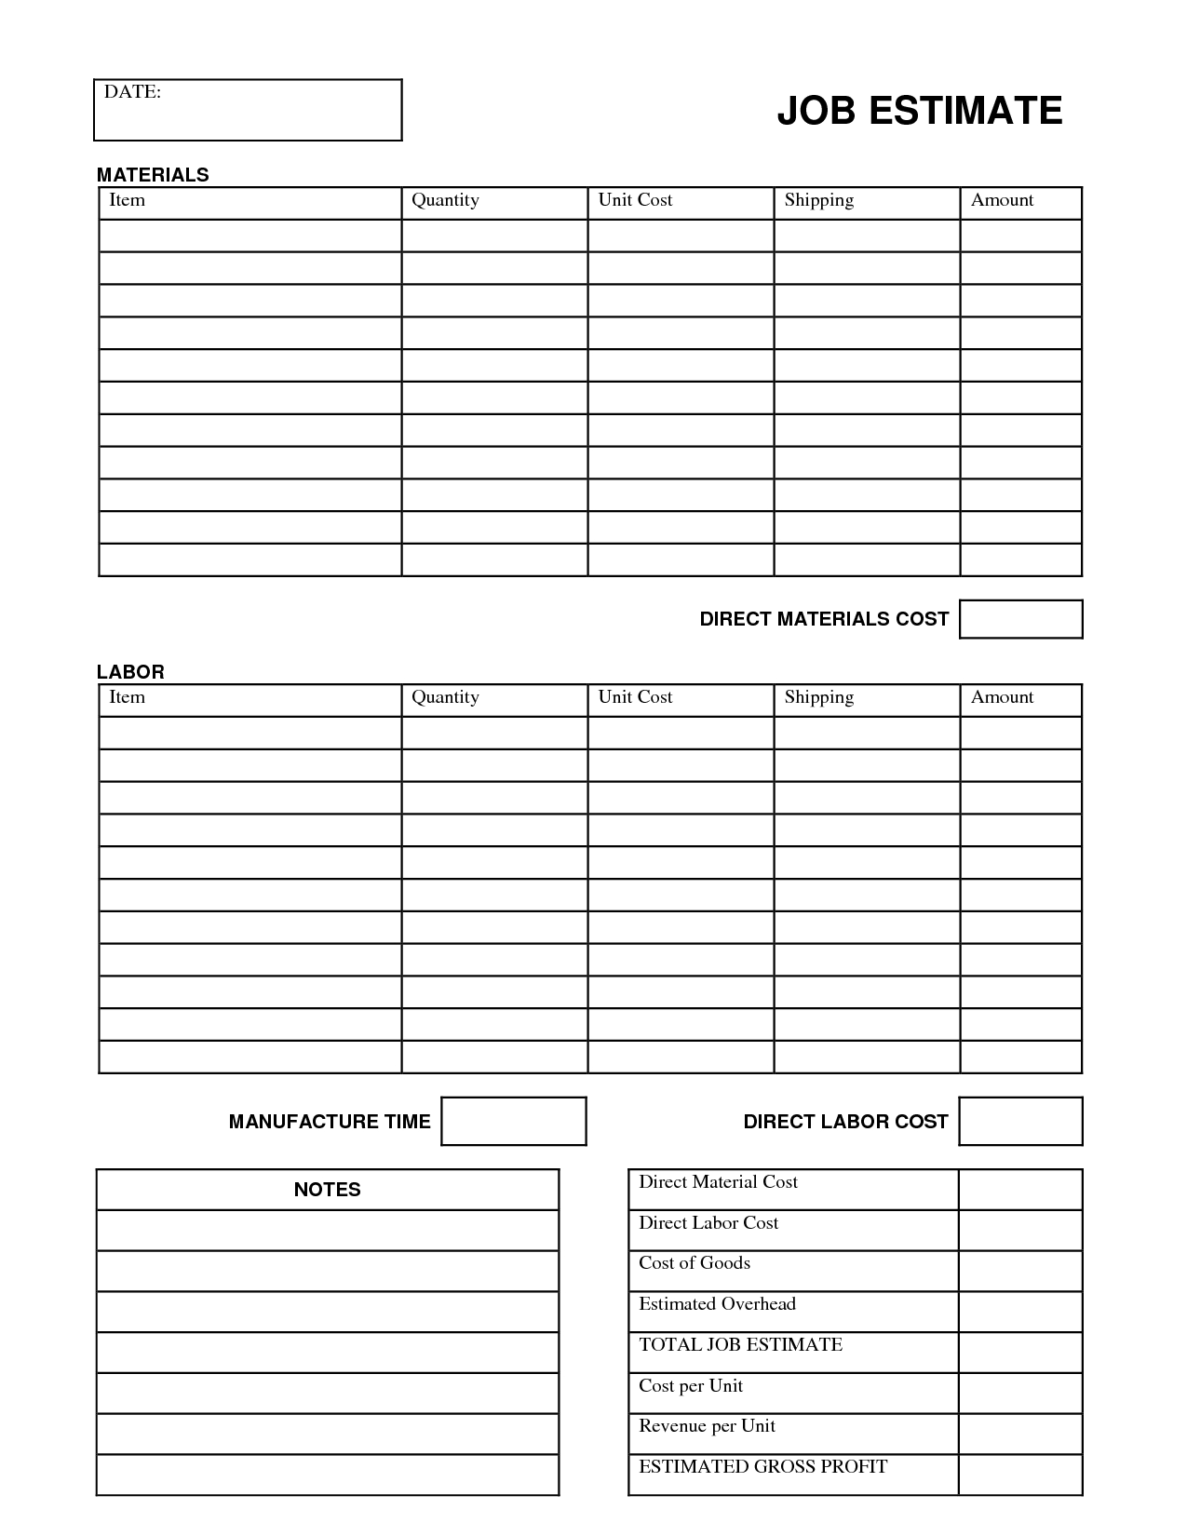 printable-job-estimate-forms-job-estimate-free-office-form-for-construction-cost-report-template